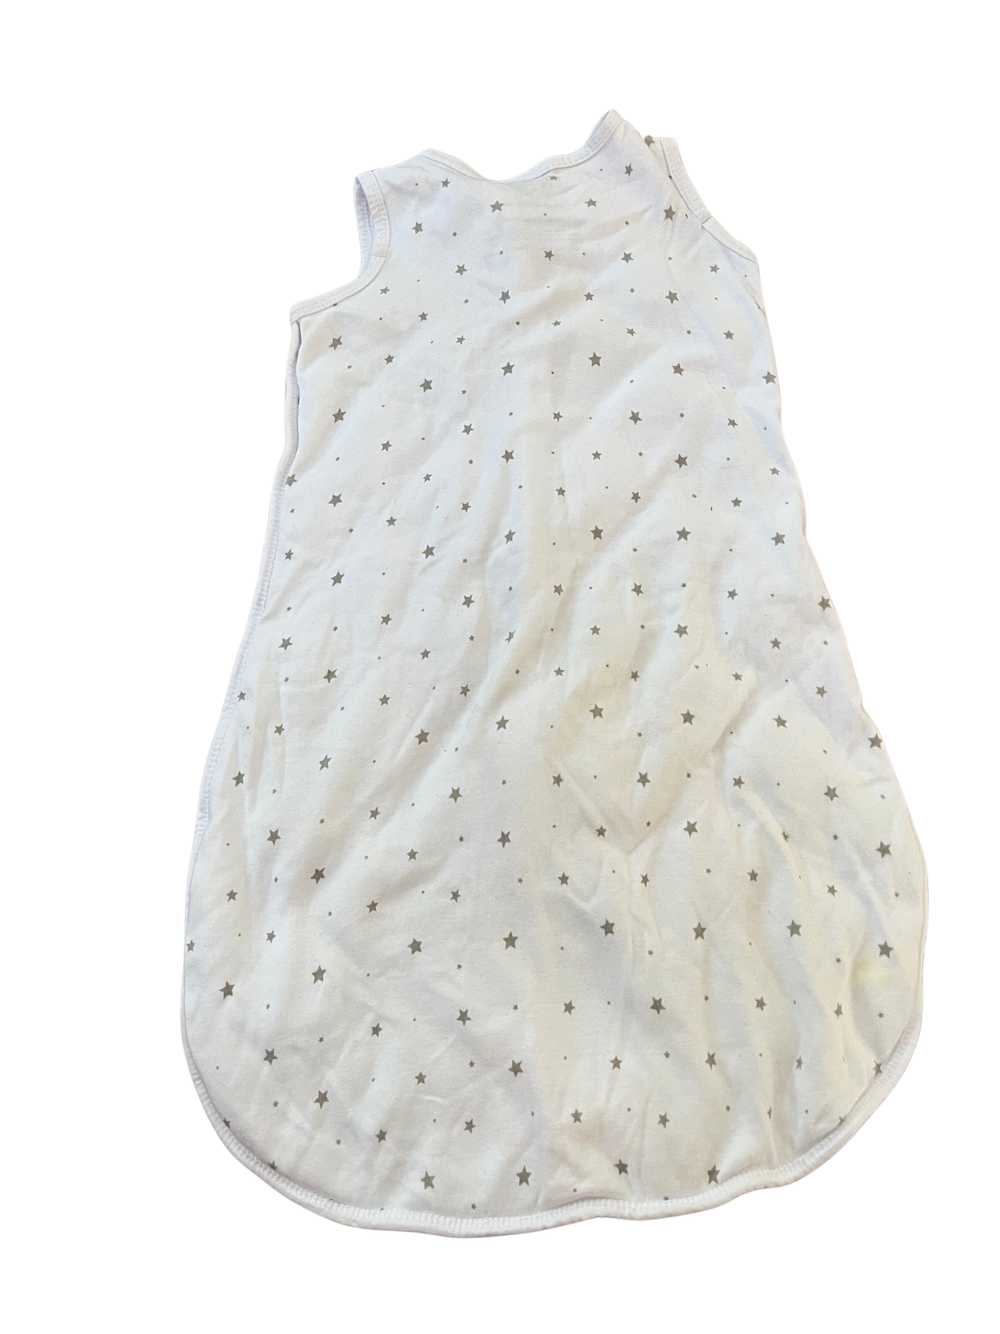 Dreamland Baby Dream Weighted Sack - image 1